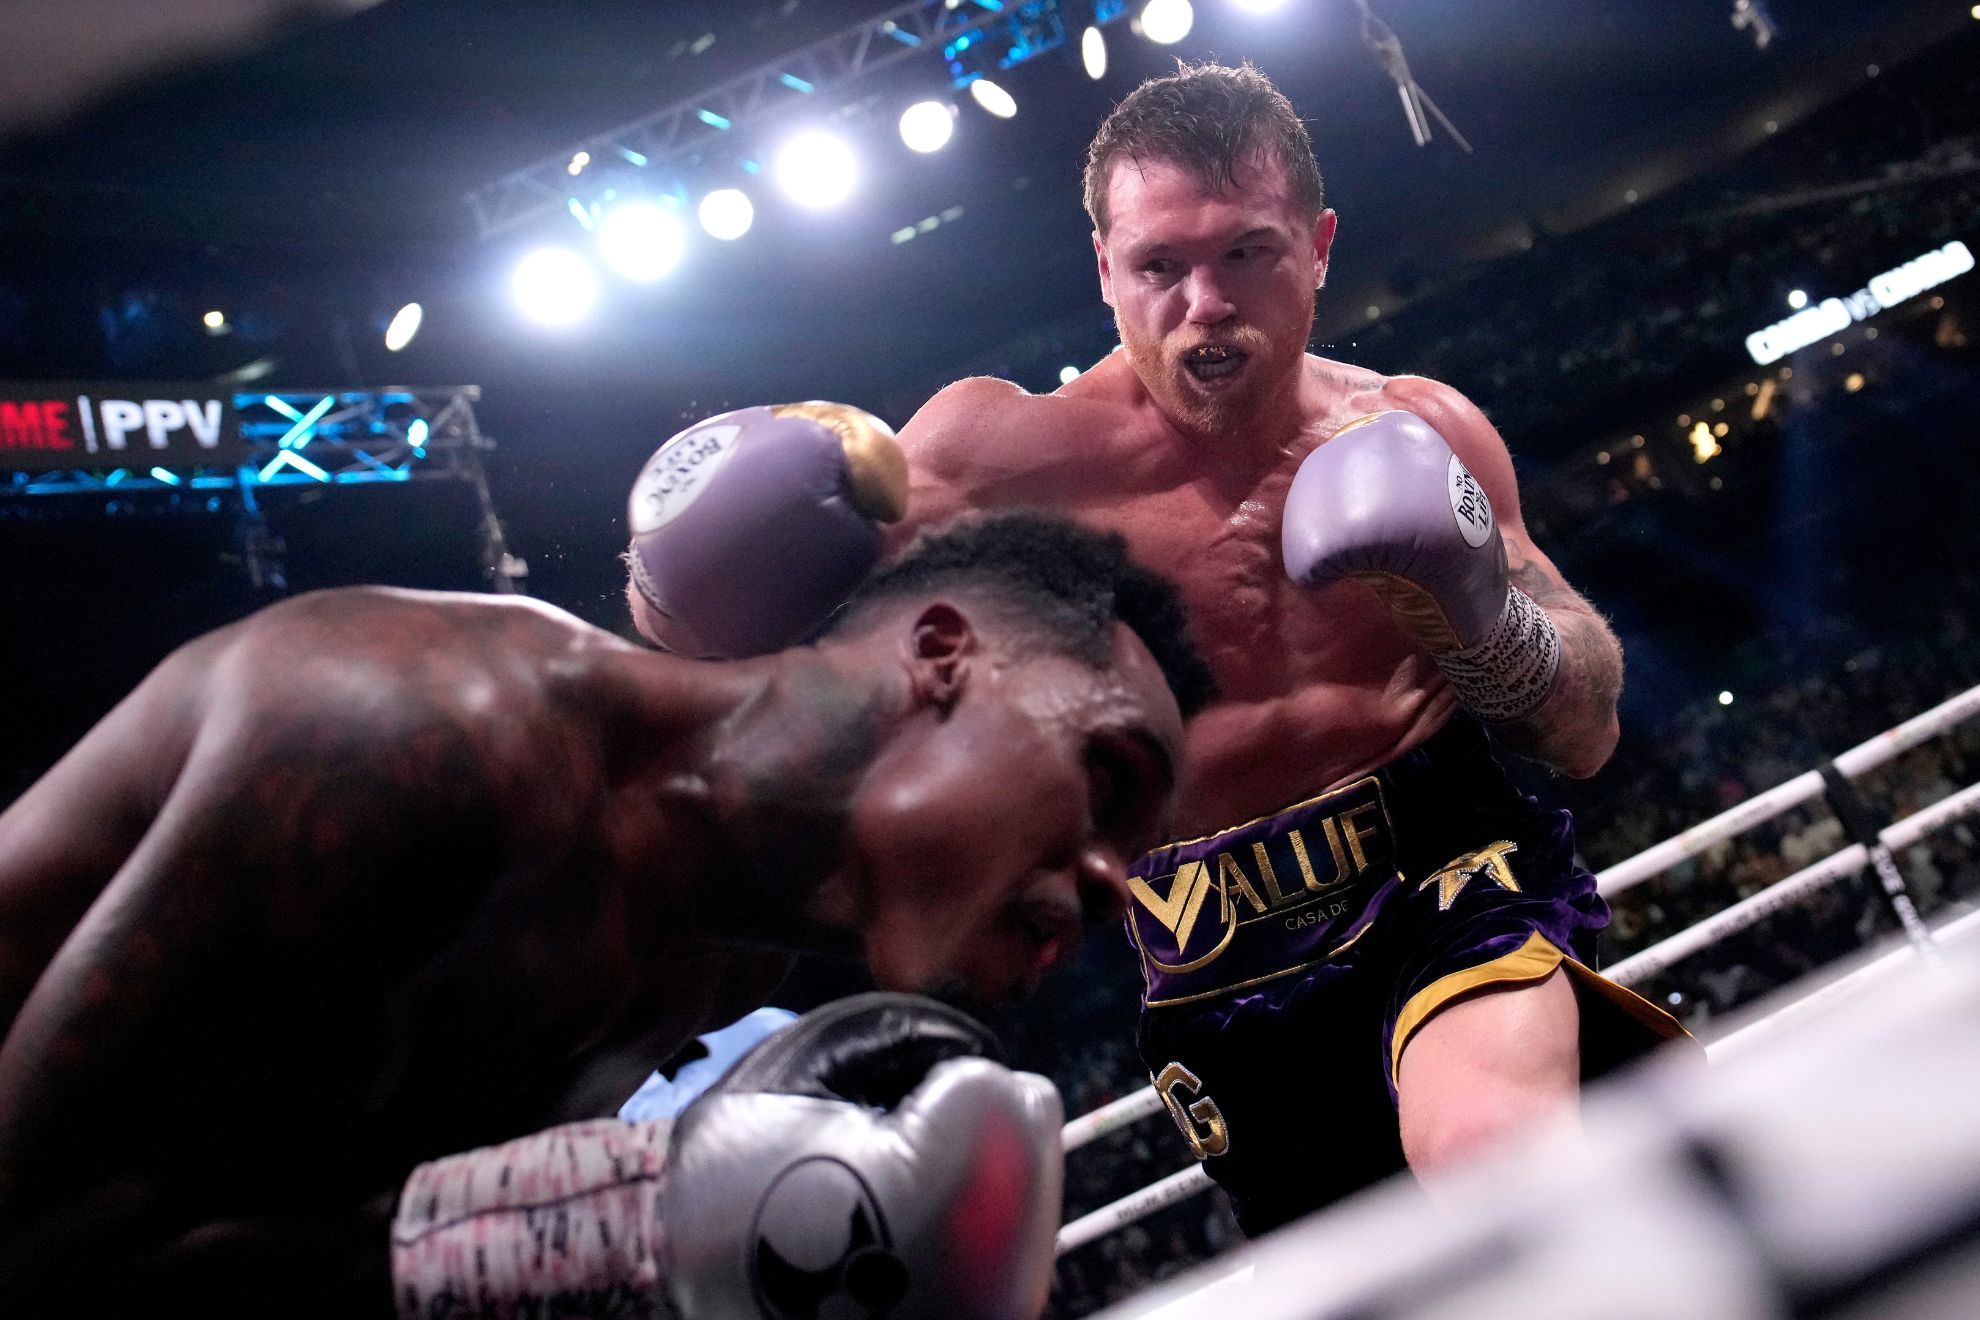 Canelo Alvarez gives master class in boxing to defeat Jermell Charlo, retain title